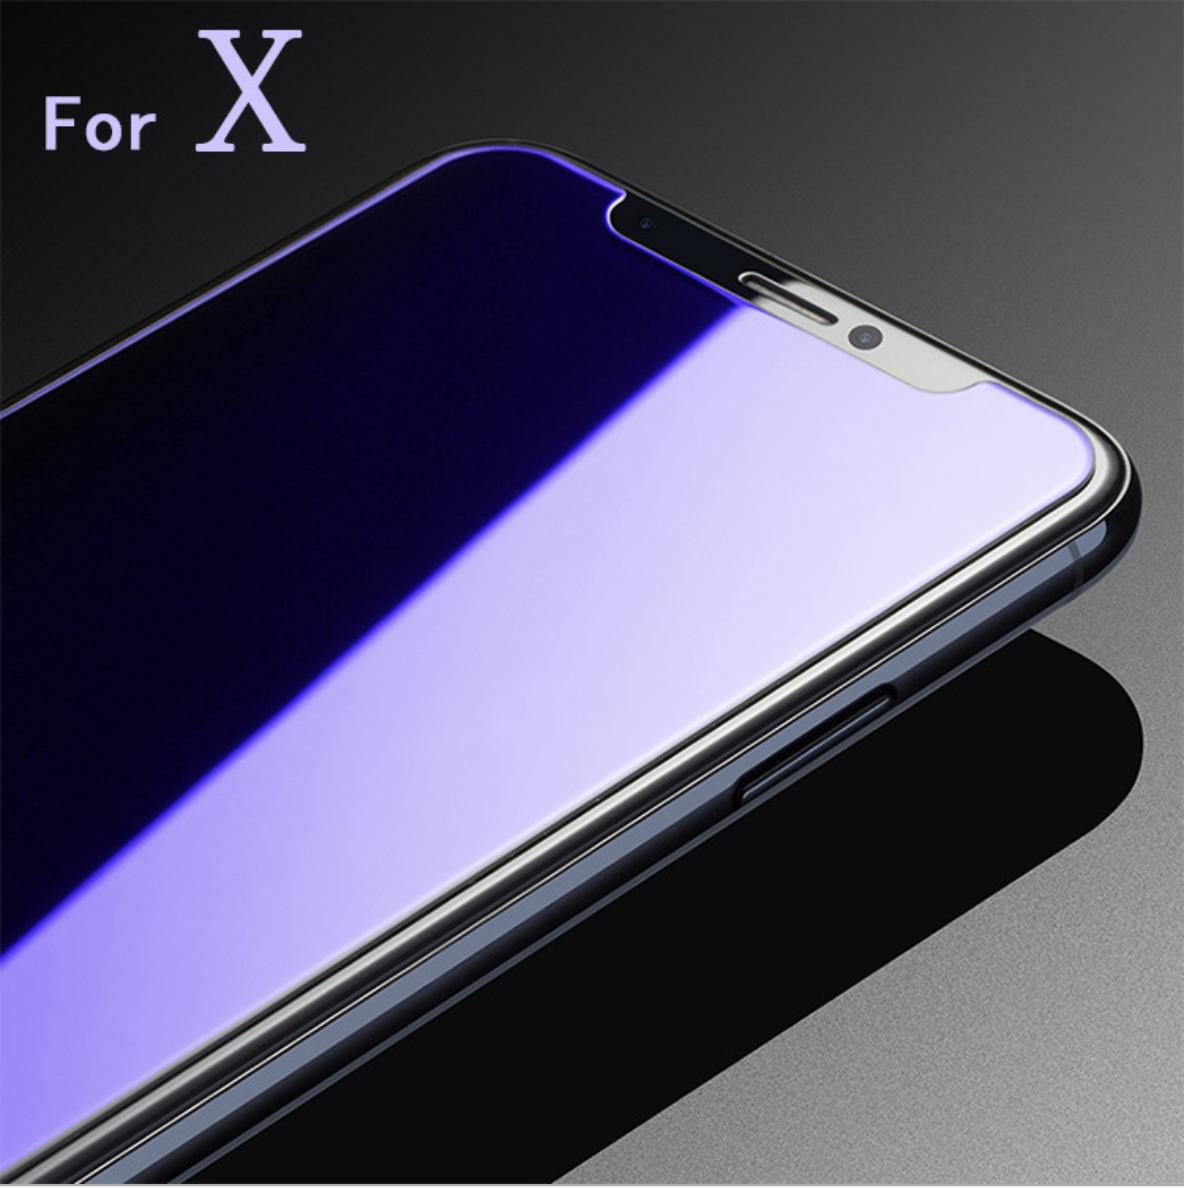 Anti-blue light Premium Tempered glass screen protector for iPhone X, iPhone XS, iPhone XS Max, iPhone XR, iPhone 8, iPhone...